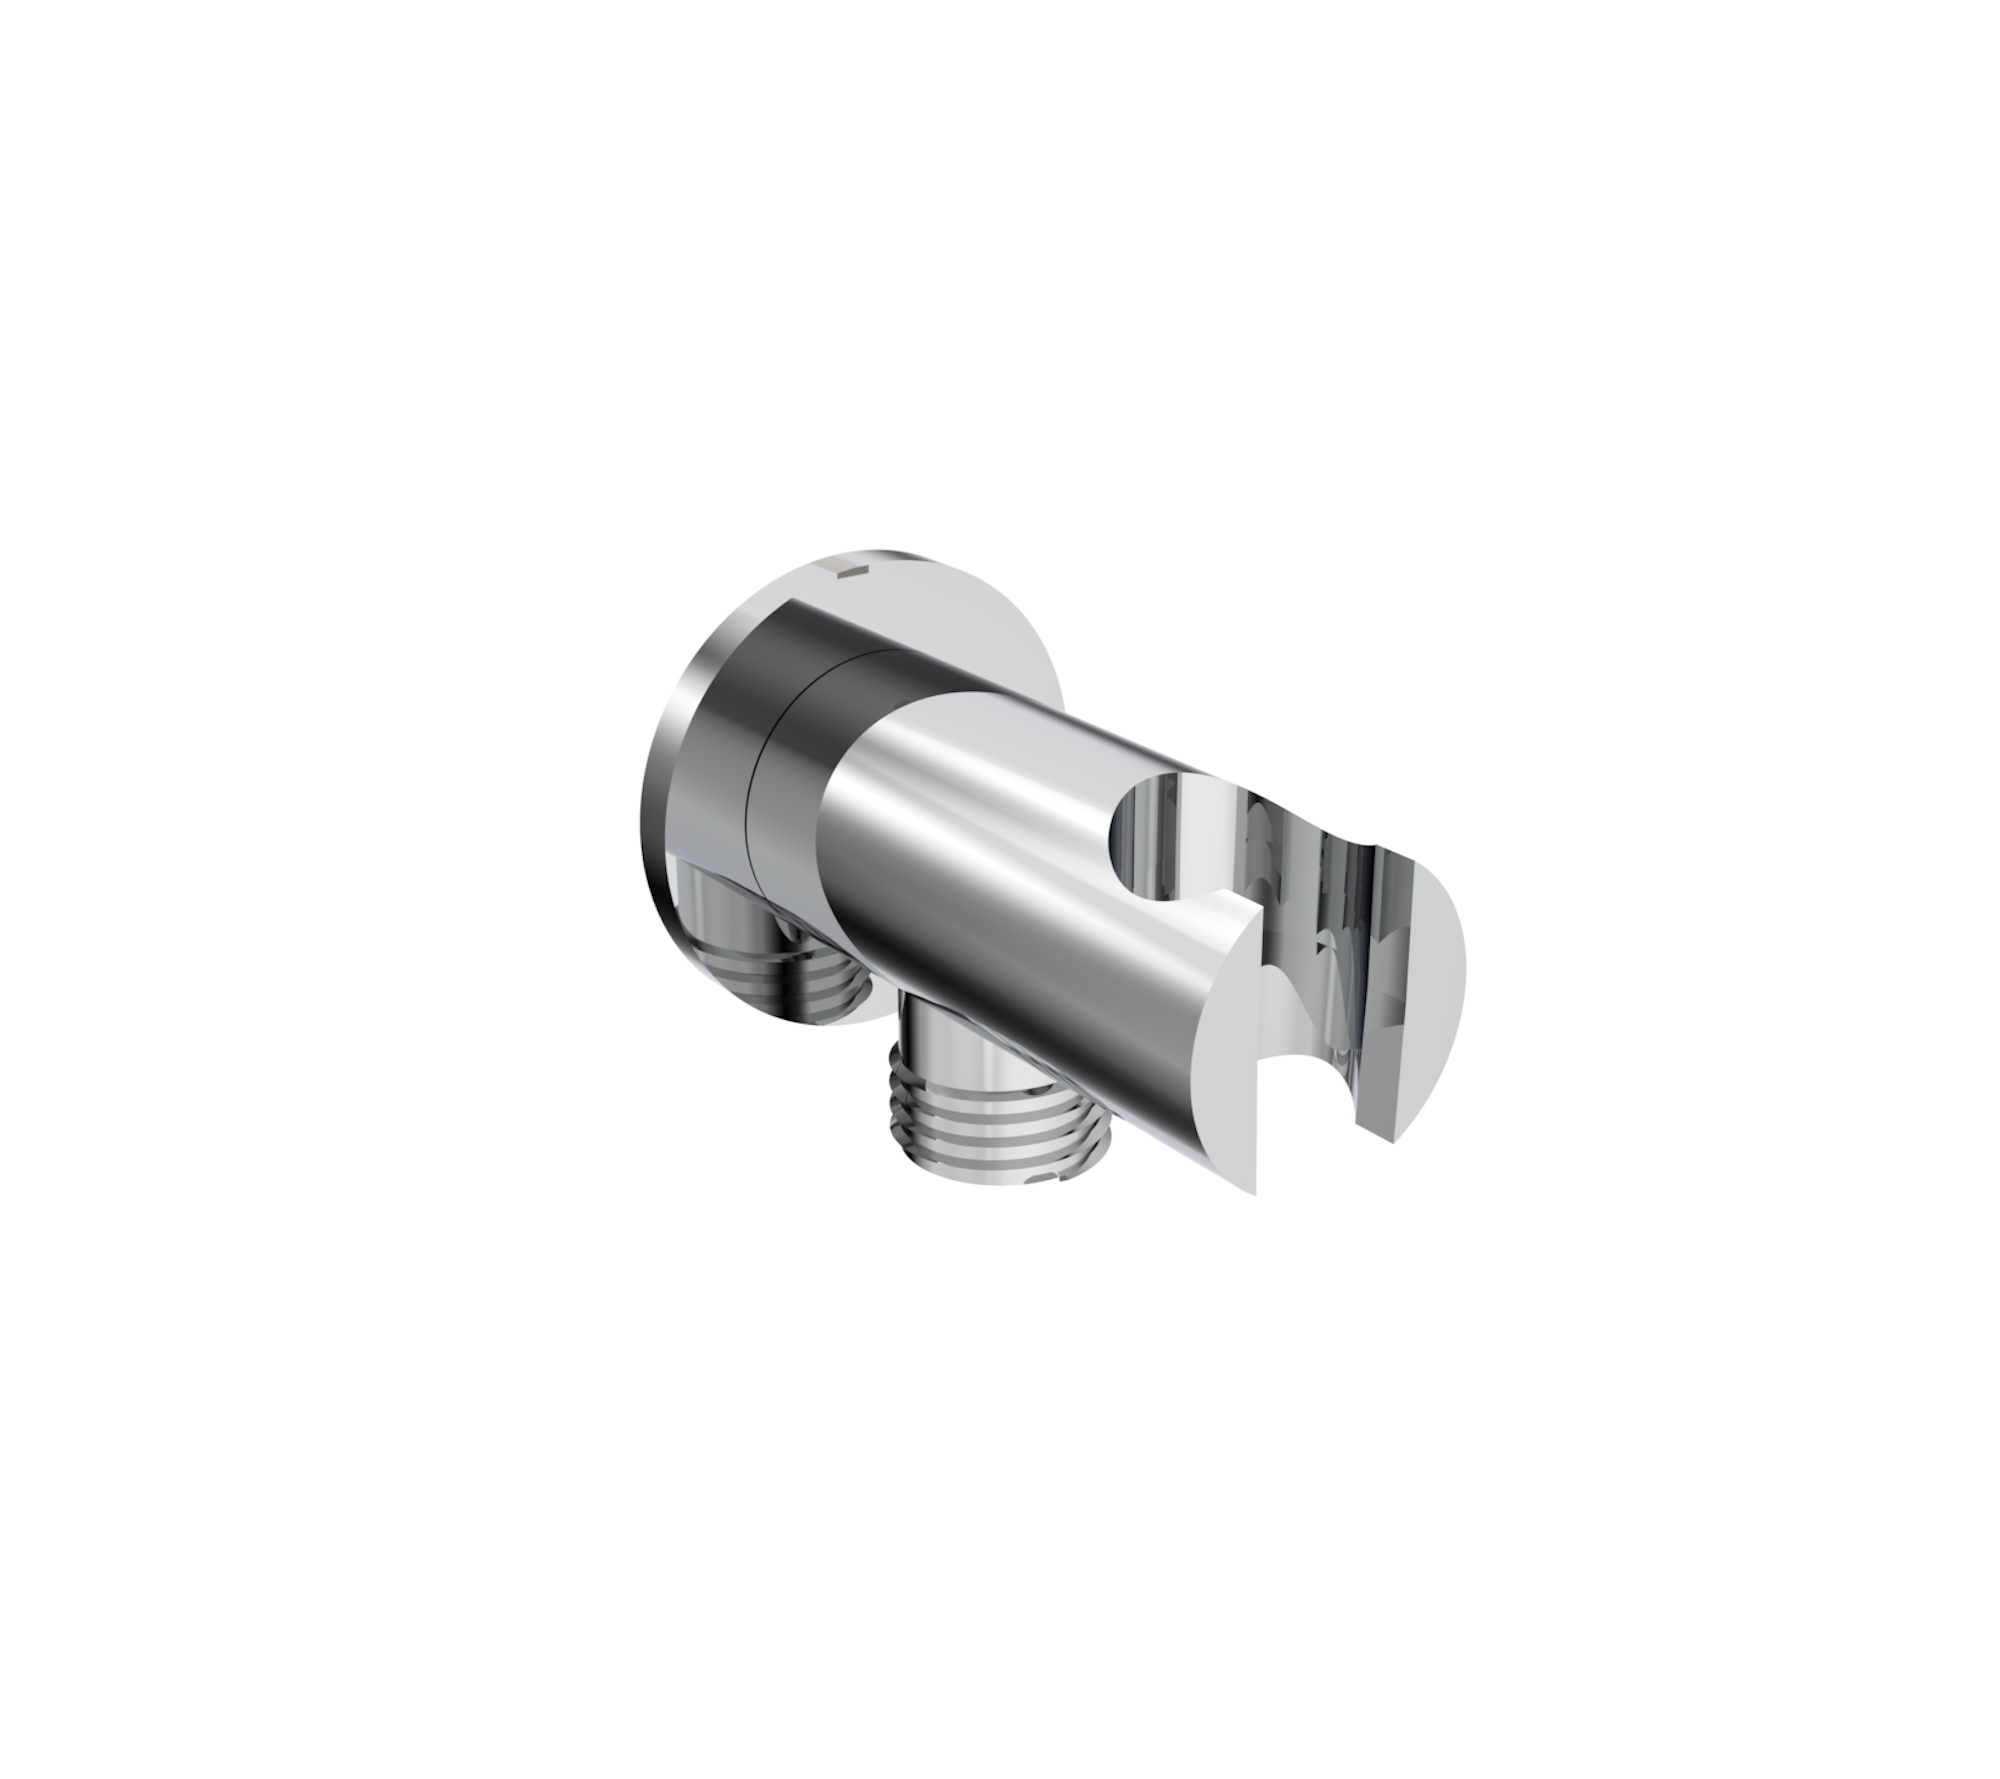 COS round shower outlet elbow & holder - Chrome